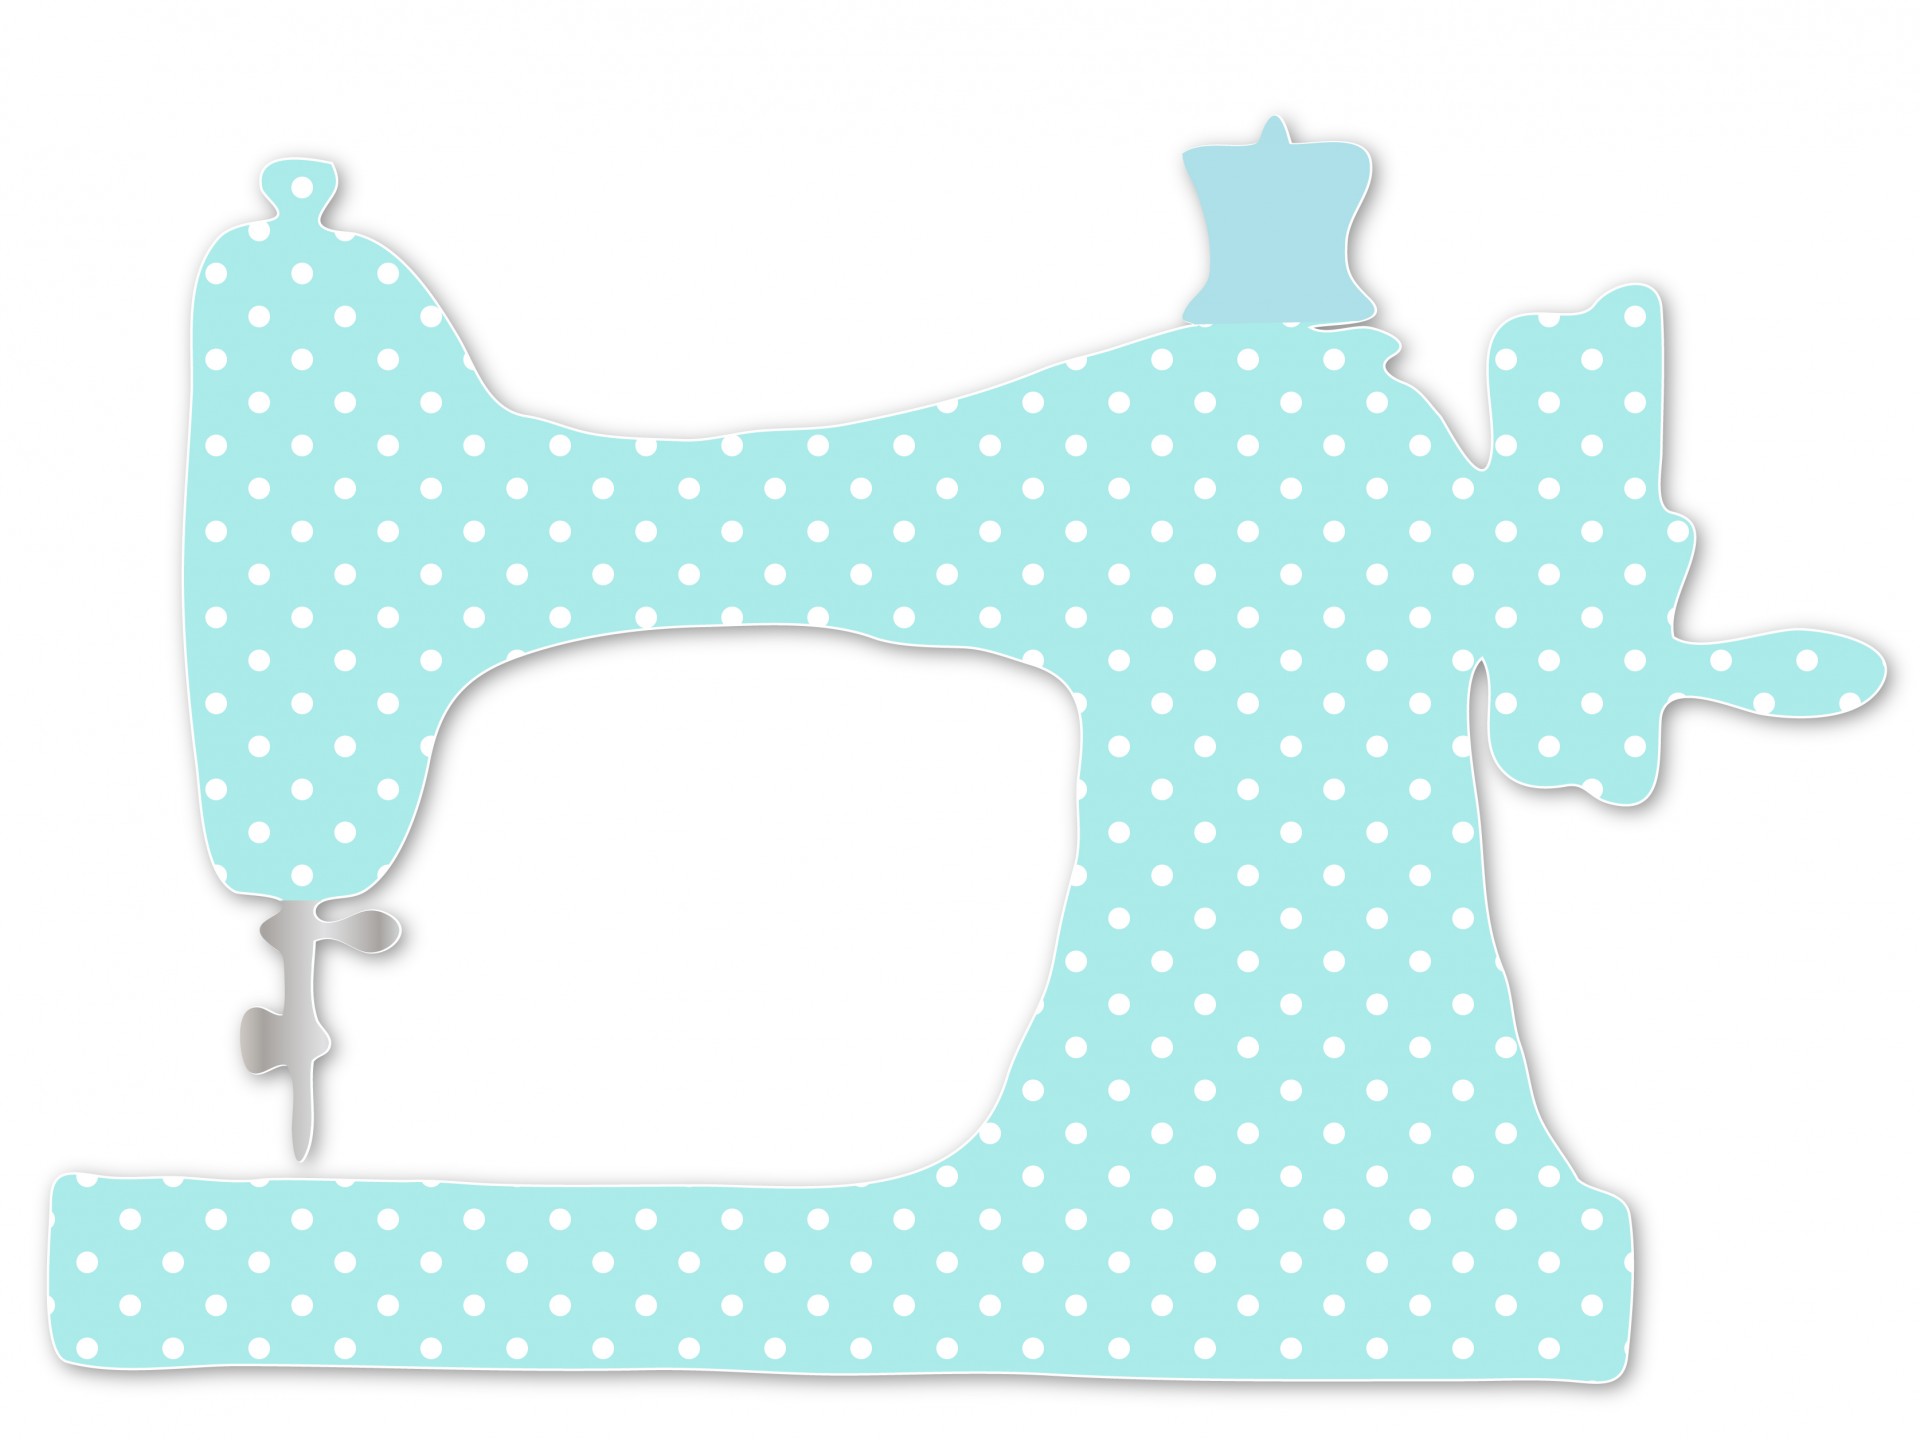 Blue and white polka dots vintage sewing machine clipart for scrapbooking